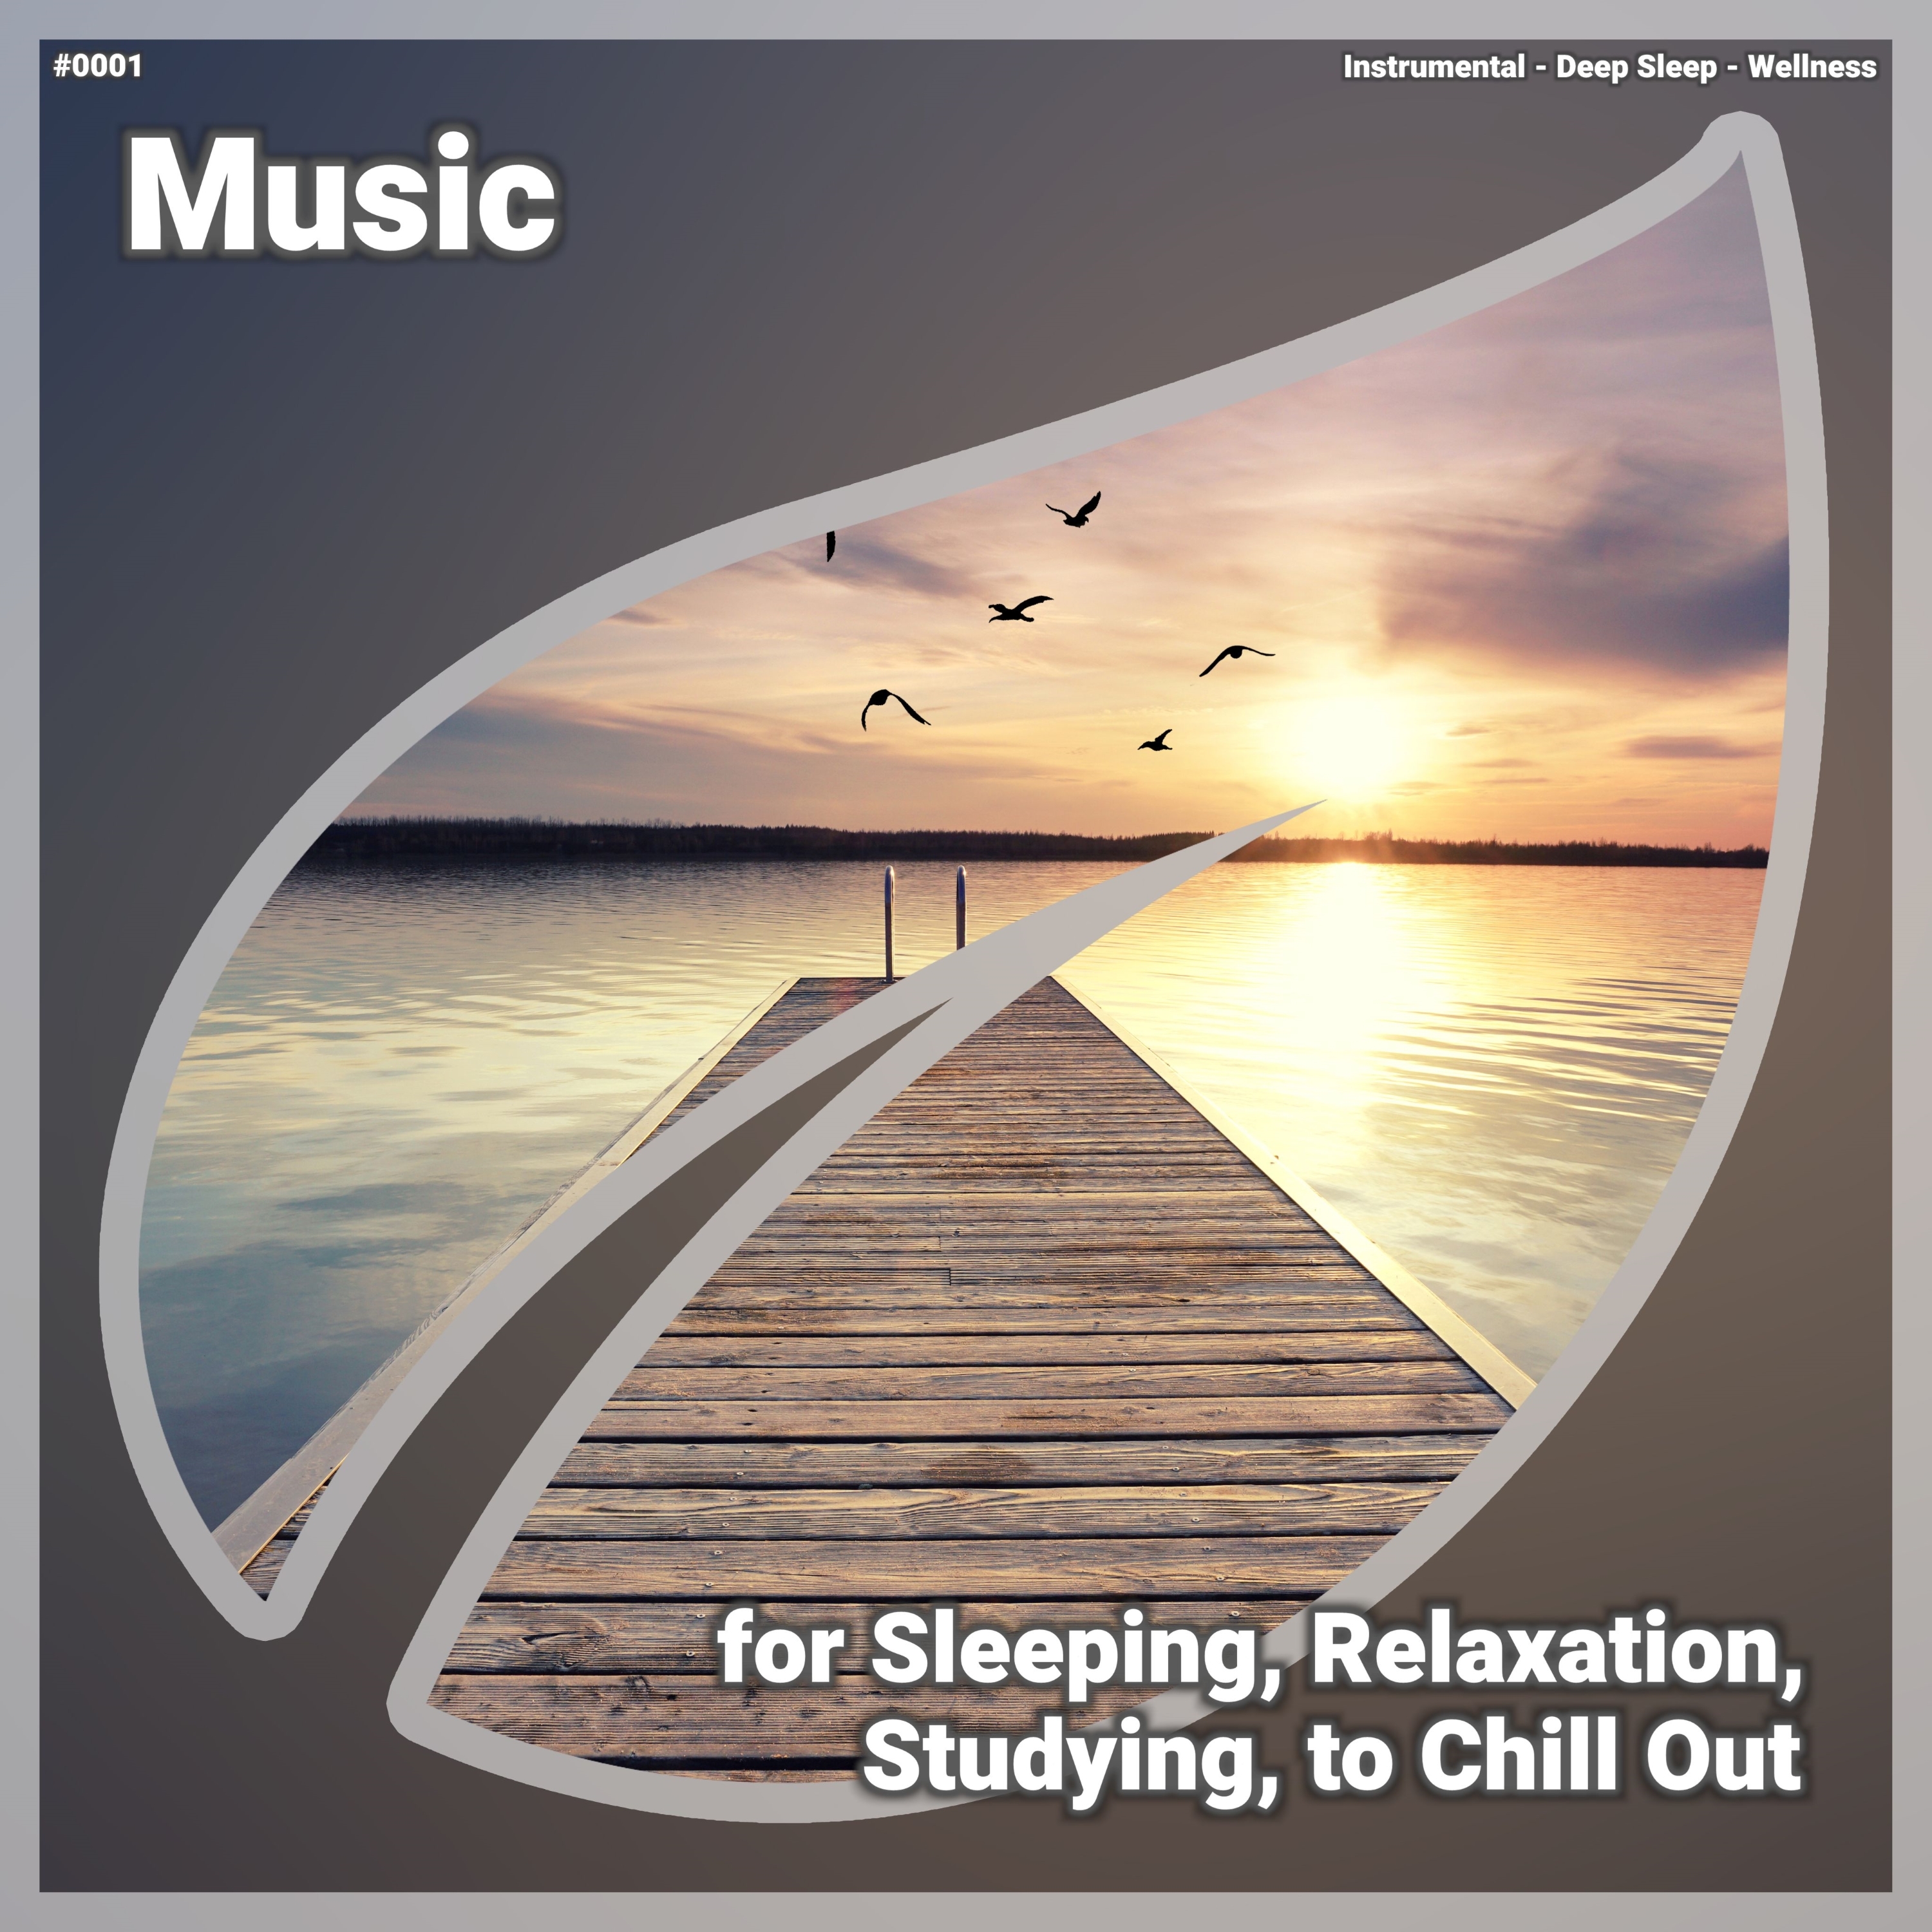 I-download Relaxing Music, Pt. 11